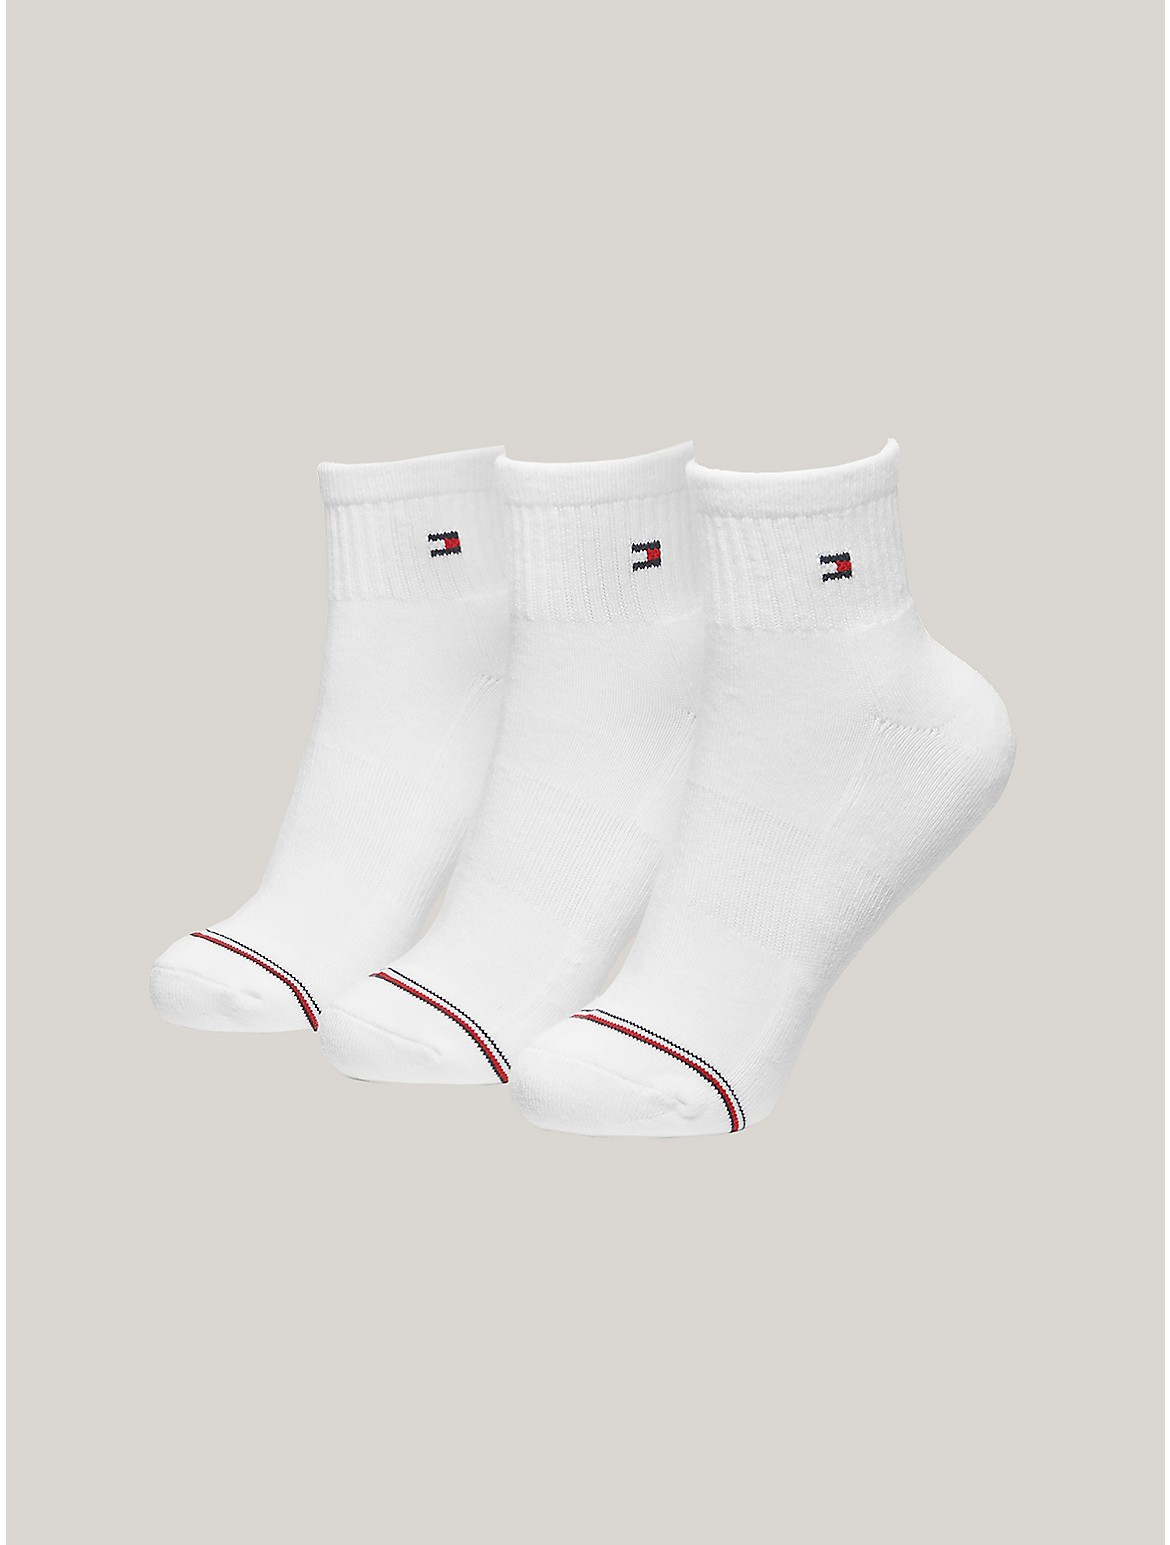 Tommy Hilfiger Women's Classic Quarter Top Sock 3-Pack - White